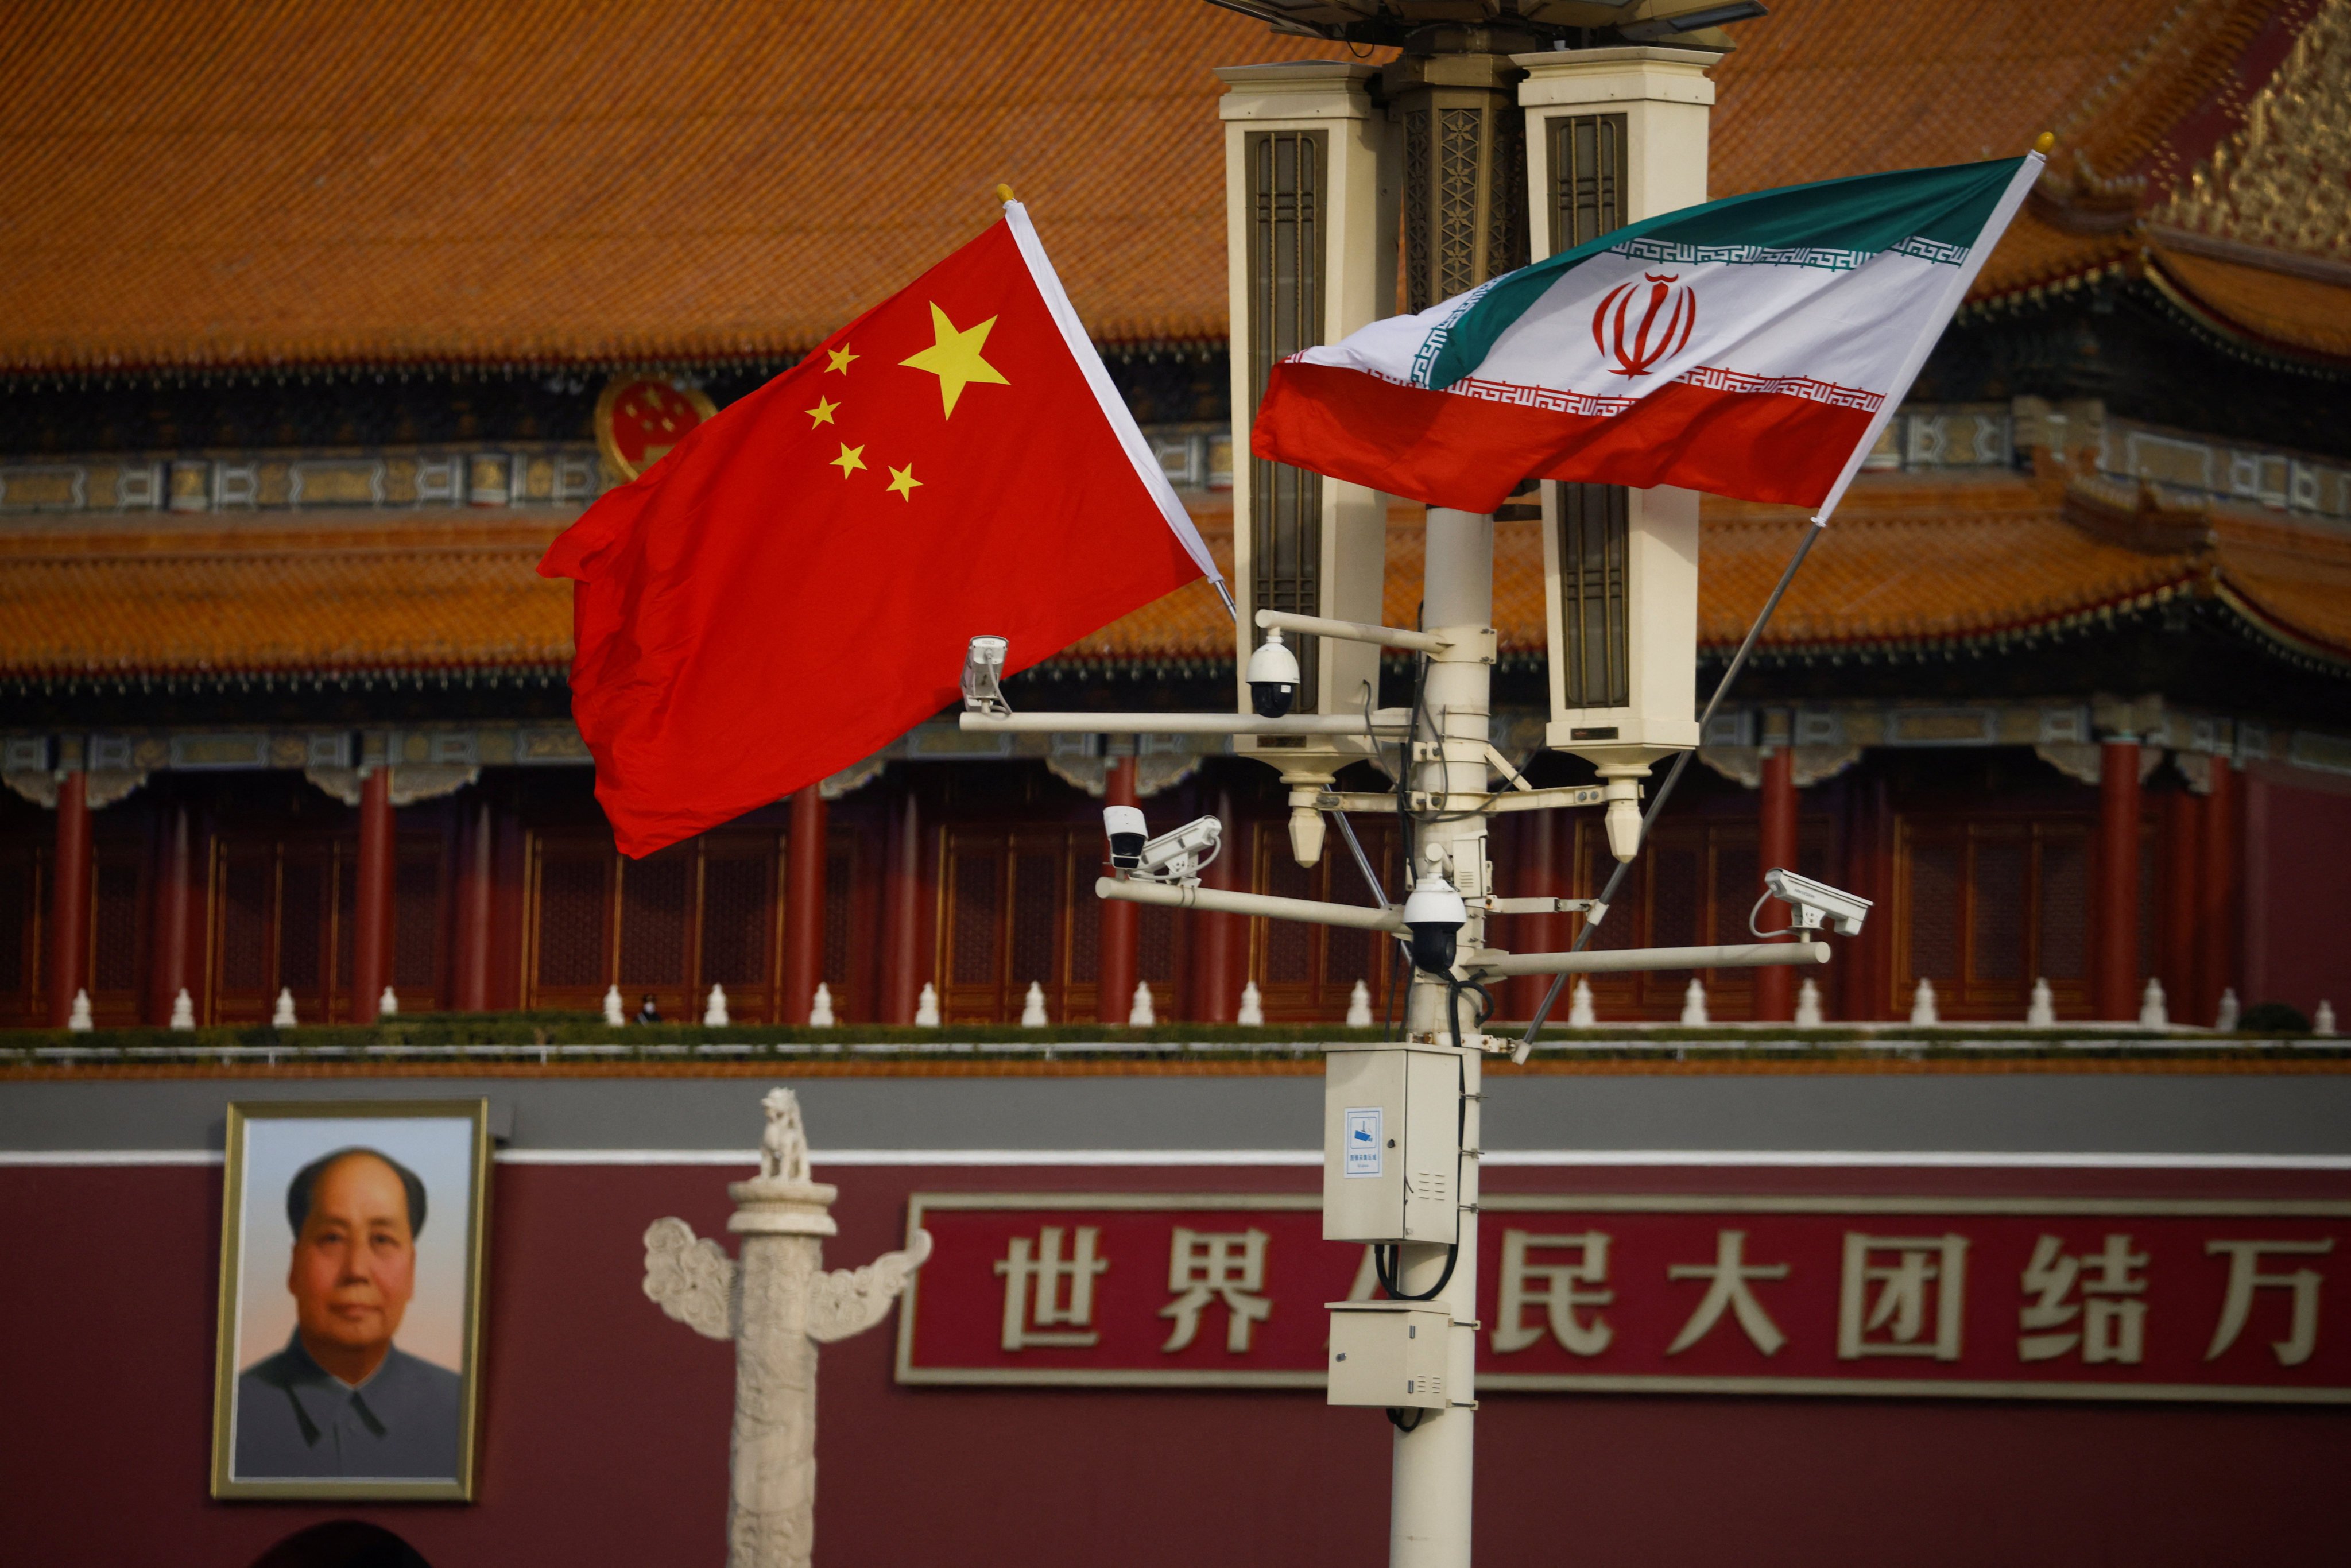 The Iranian foreign ministry asked China to revise its stance on three disputed islands “considering the strategic cooperation between Tehran and Beijing”, according to a statement from Tehran. Photo: Reuters